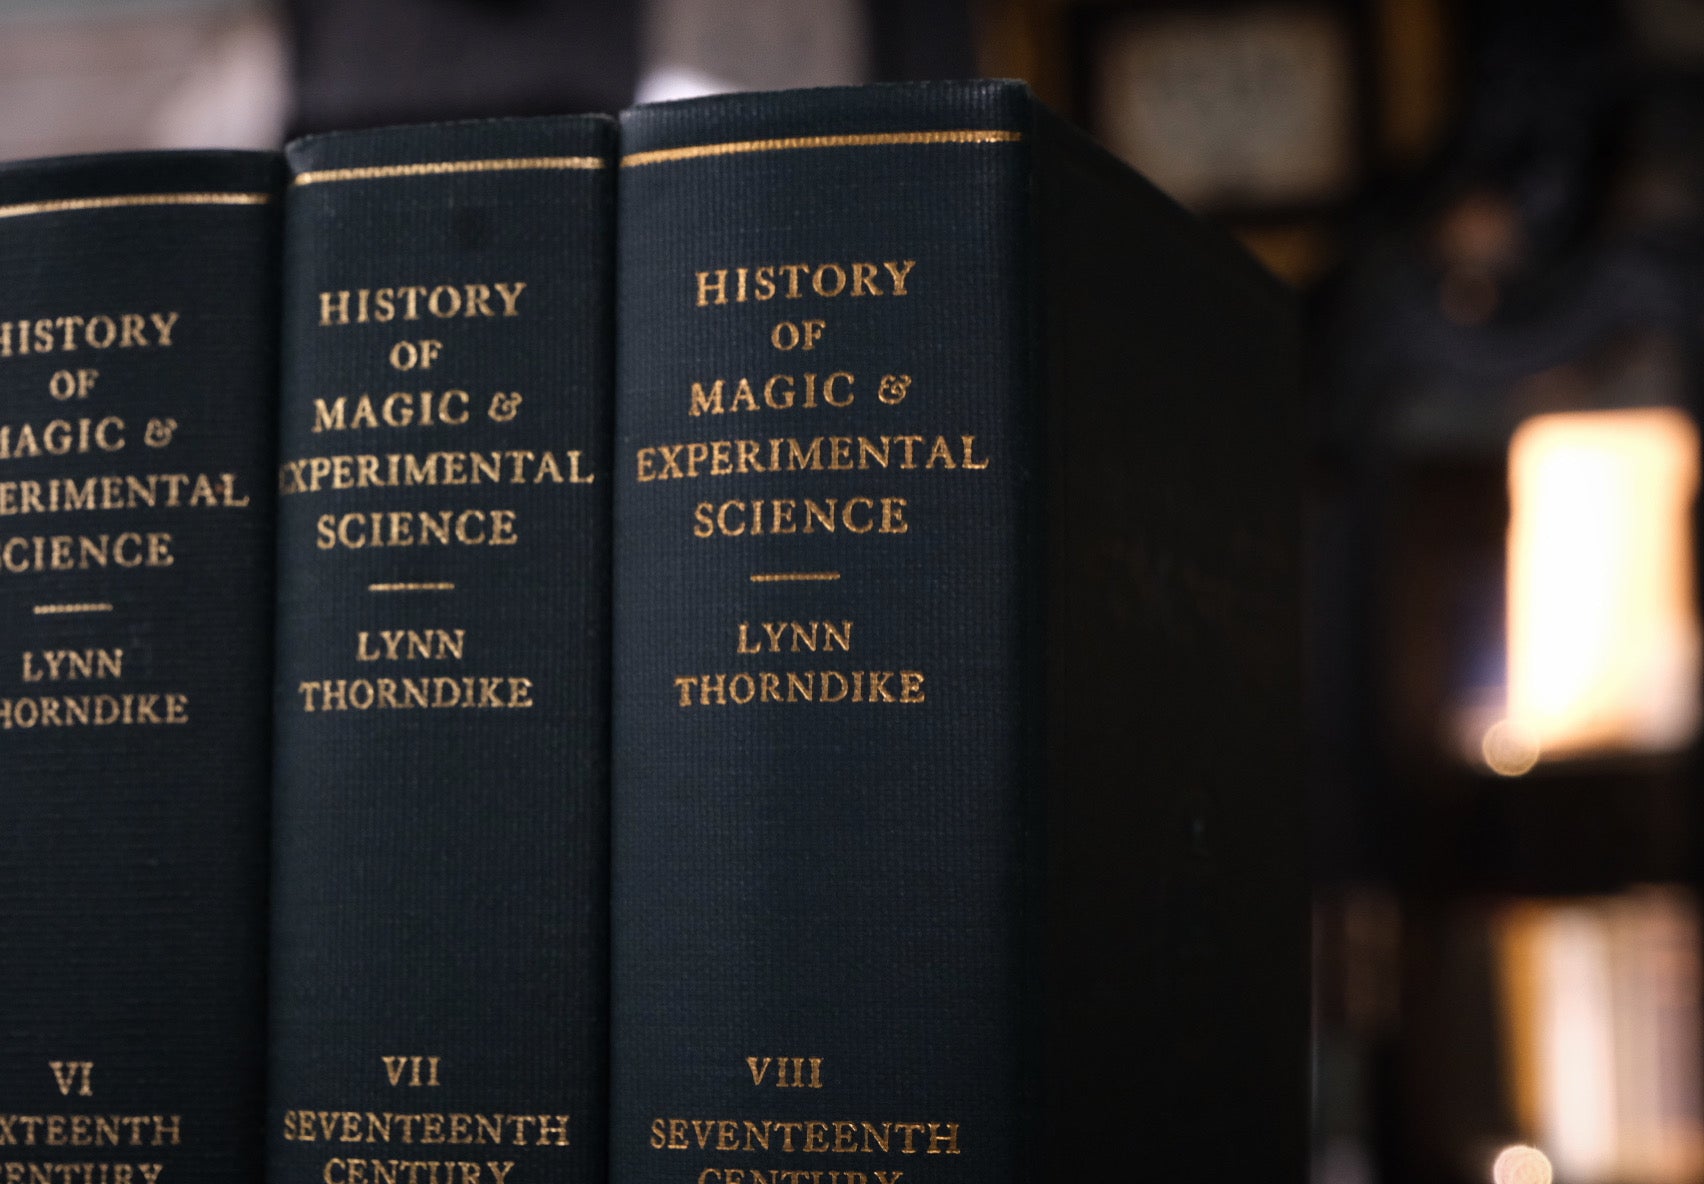 The History of Magic and Experimental Science by Lynn Thorndike (8 